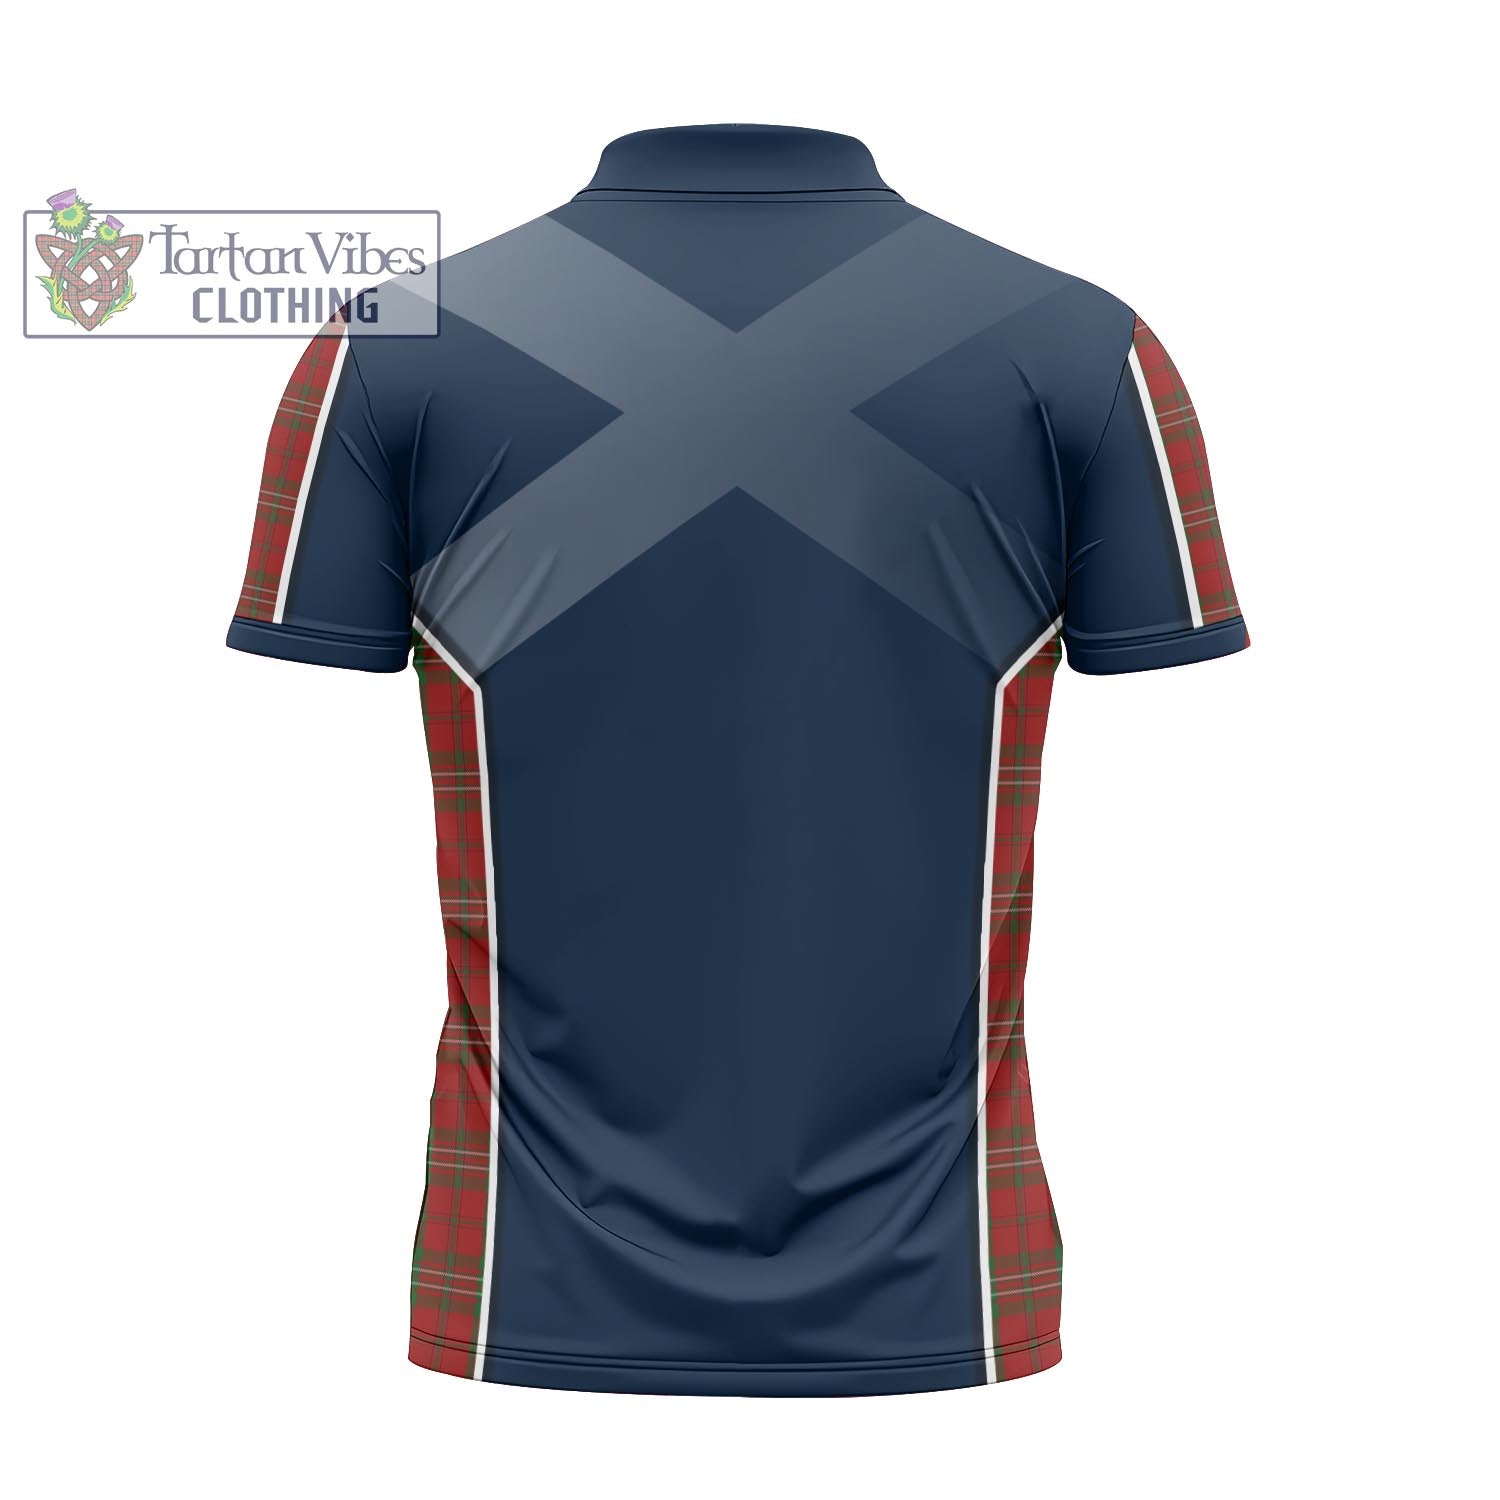 Tartan Vibes Clothing Scott Tartan Zipper Polo Shirt with Family Crest and Scottish Thistle Vibes Sport Style